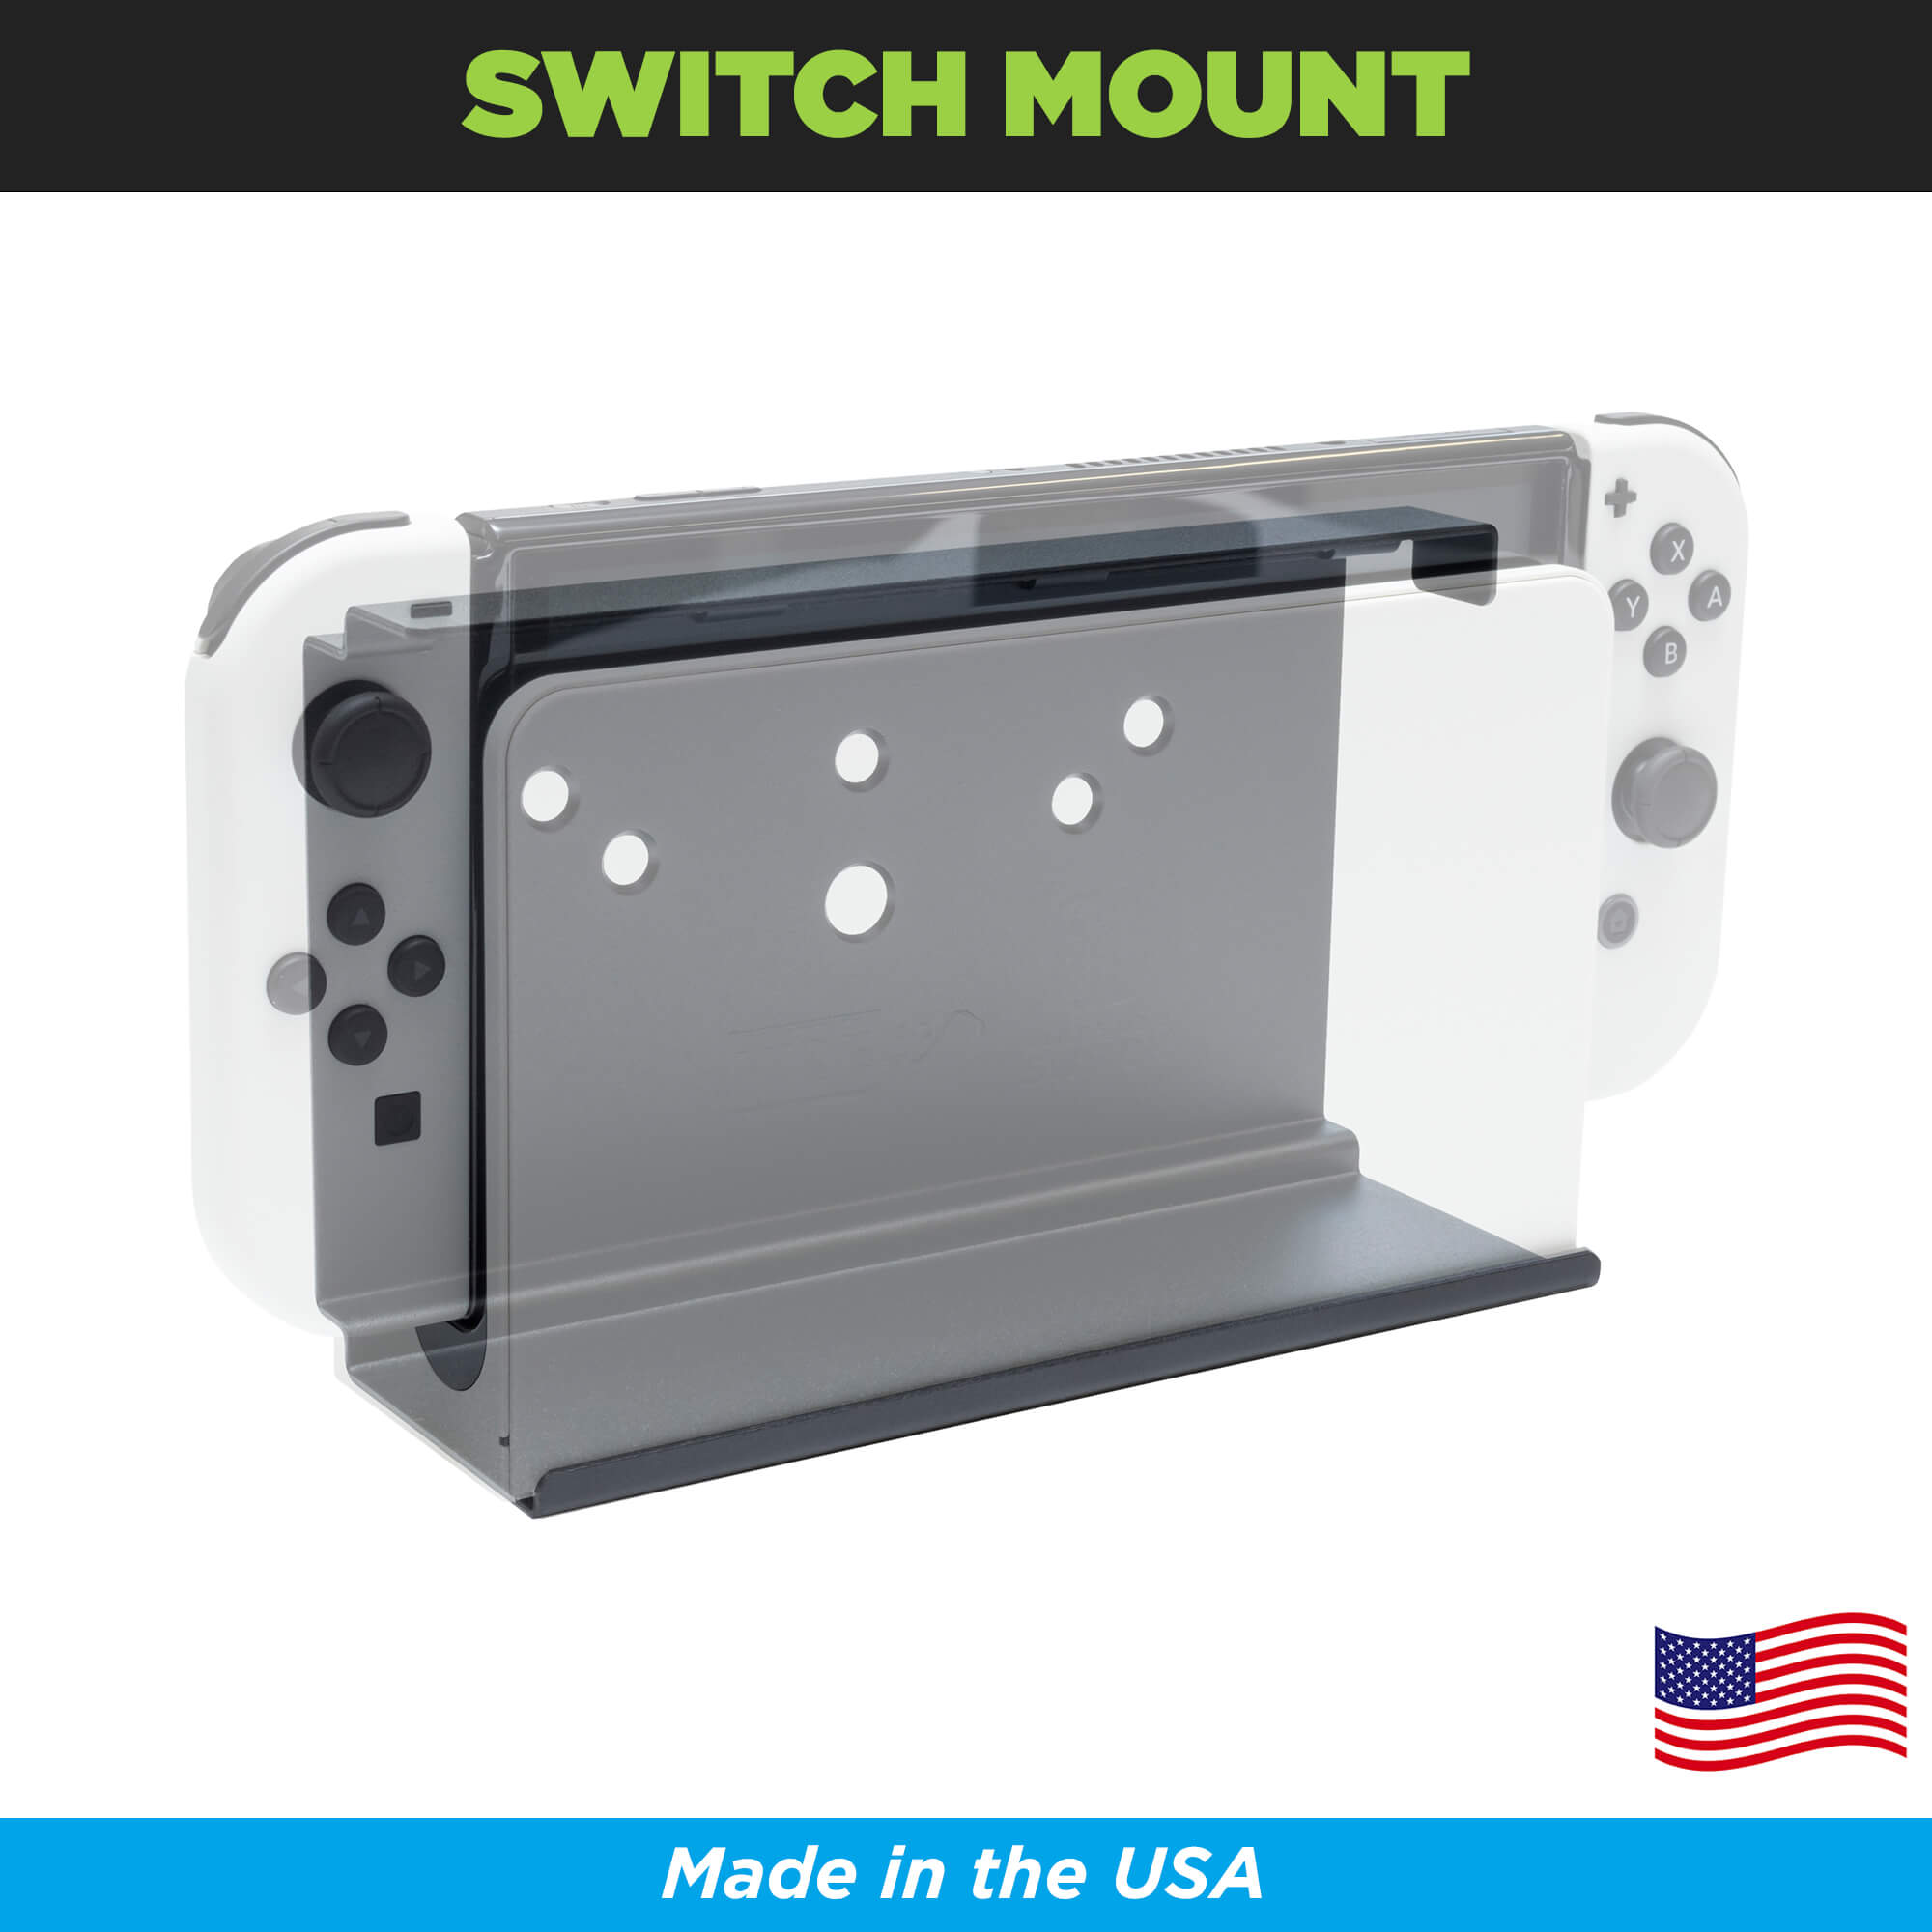  HIDEit Mounts Nintendo Switch Mount. This Switch Wall Mount is Made in America by an American Company.